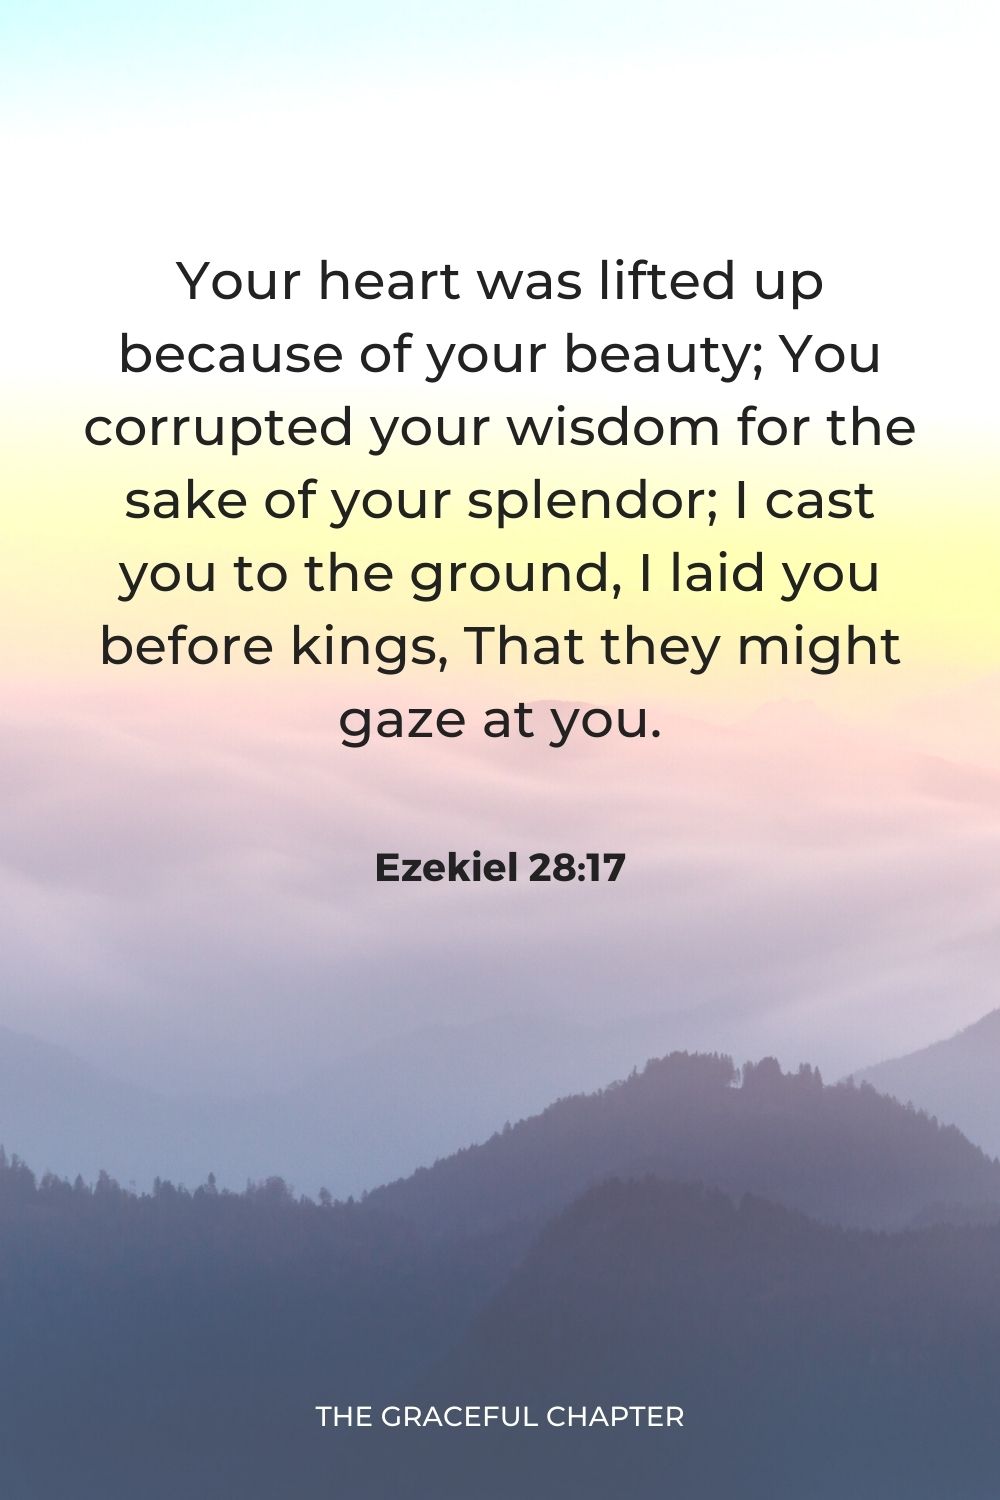 “Your heart was lifted up because of your beauty; You corrupted your wisdom for the sake of your splendor; I cast you to the ground, I laid you before kings, That they might gaze at you.